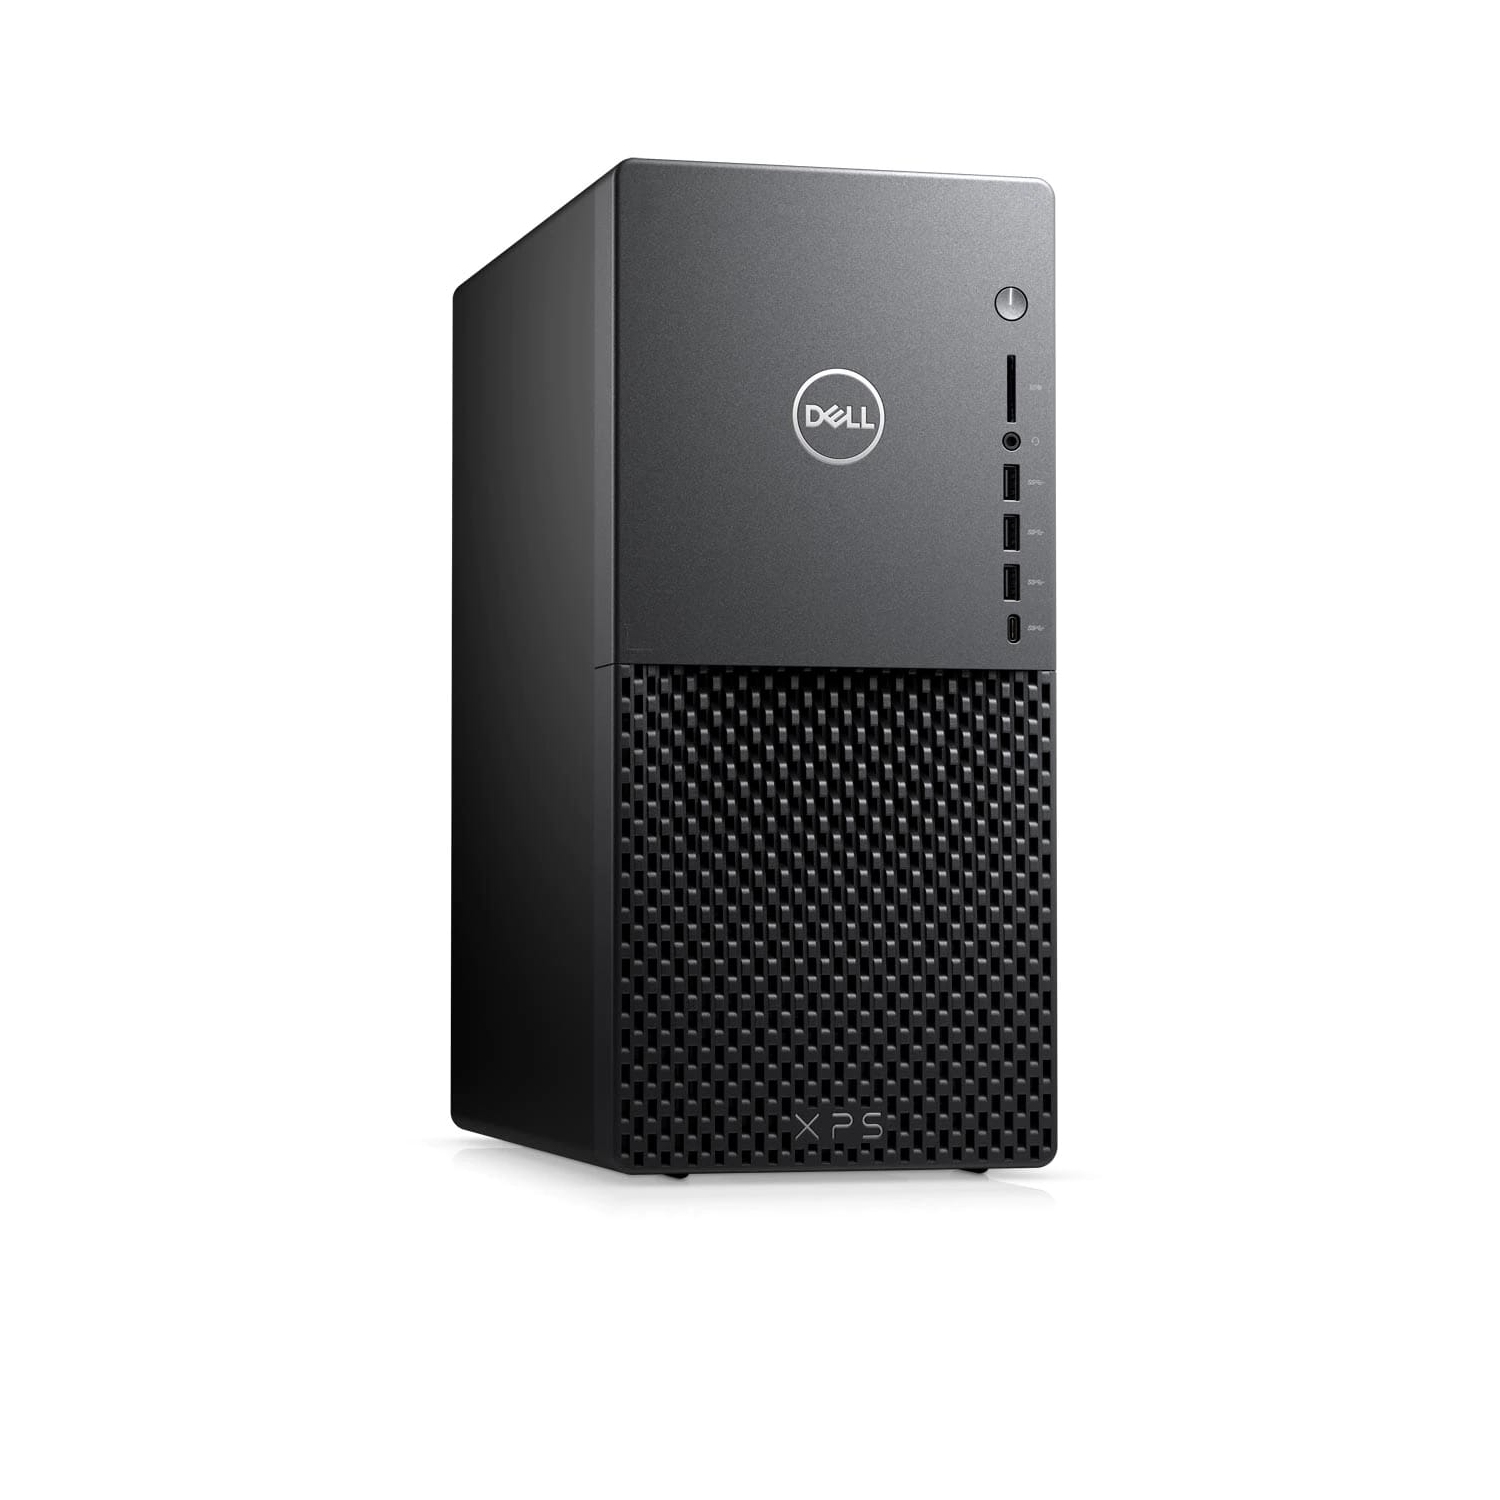 Refurbished (Excellent) - Dell XPS 8940 Desktop (2020) | Core i7 - 2TB SSD - 32GB RAM | 8 Cores @ 4.9 GHz - 11th Gen CPU Certified Refurbished